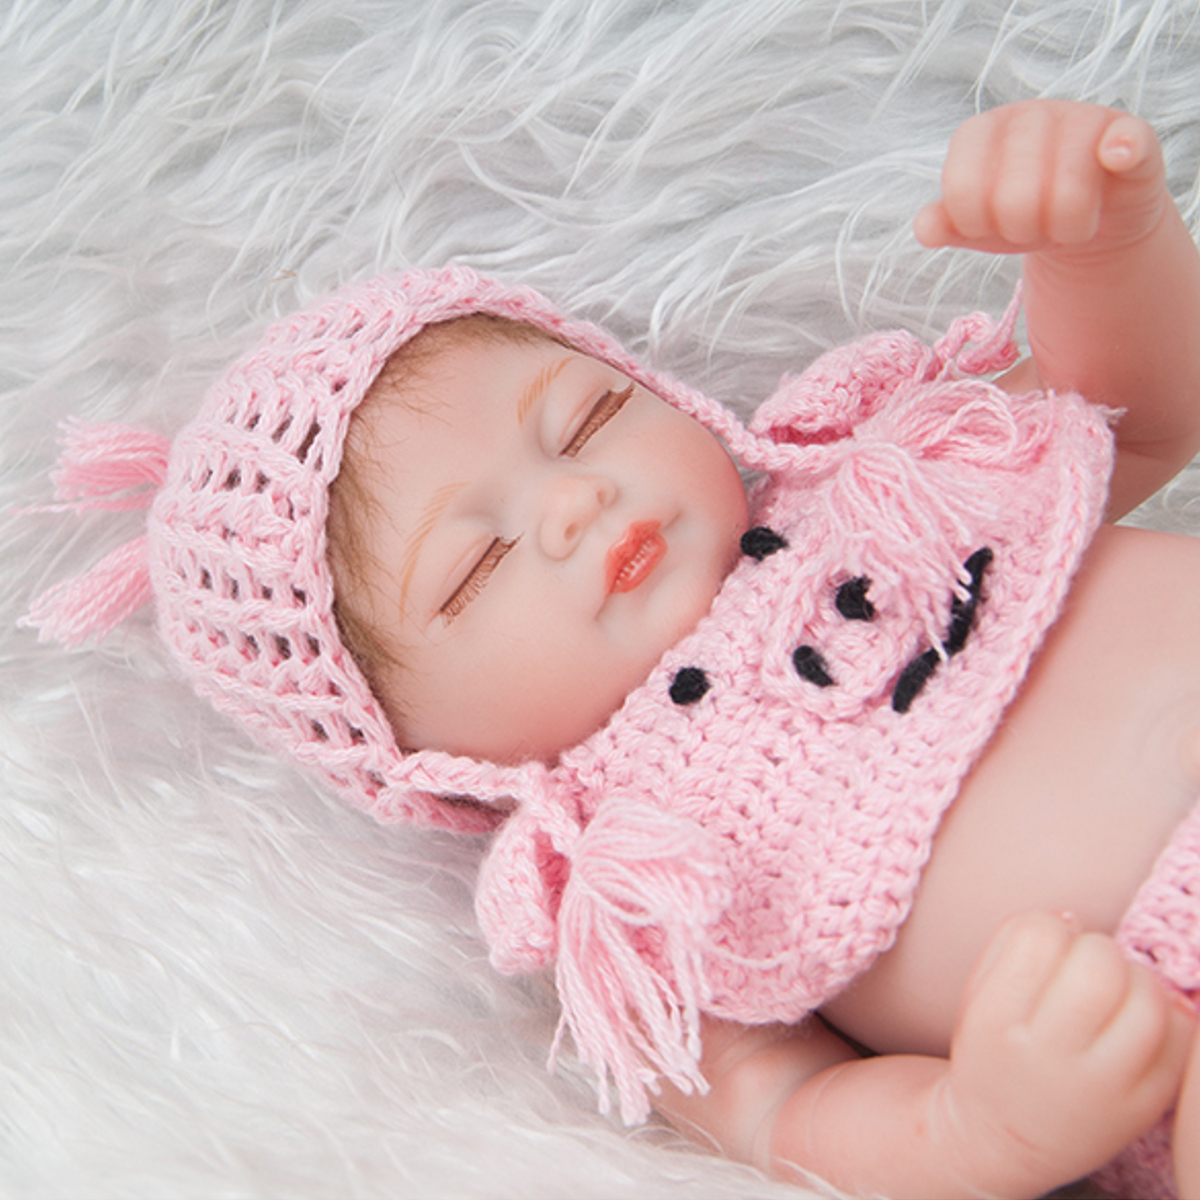 28CM-Soft-Silicone-Vinyl-Realistic-Sleeping-Reborn-Lifelike-Newborn-Baby-Doll-Toy-with-Moveable-Head-1731373-6